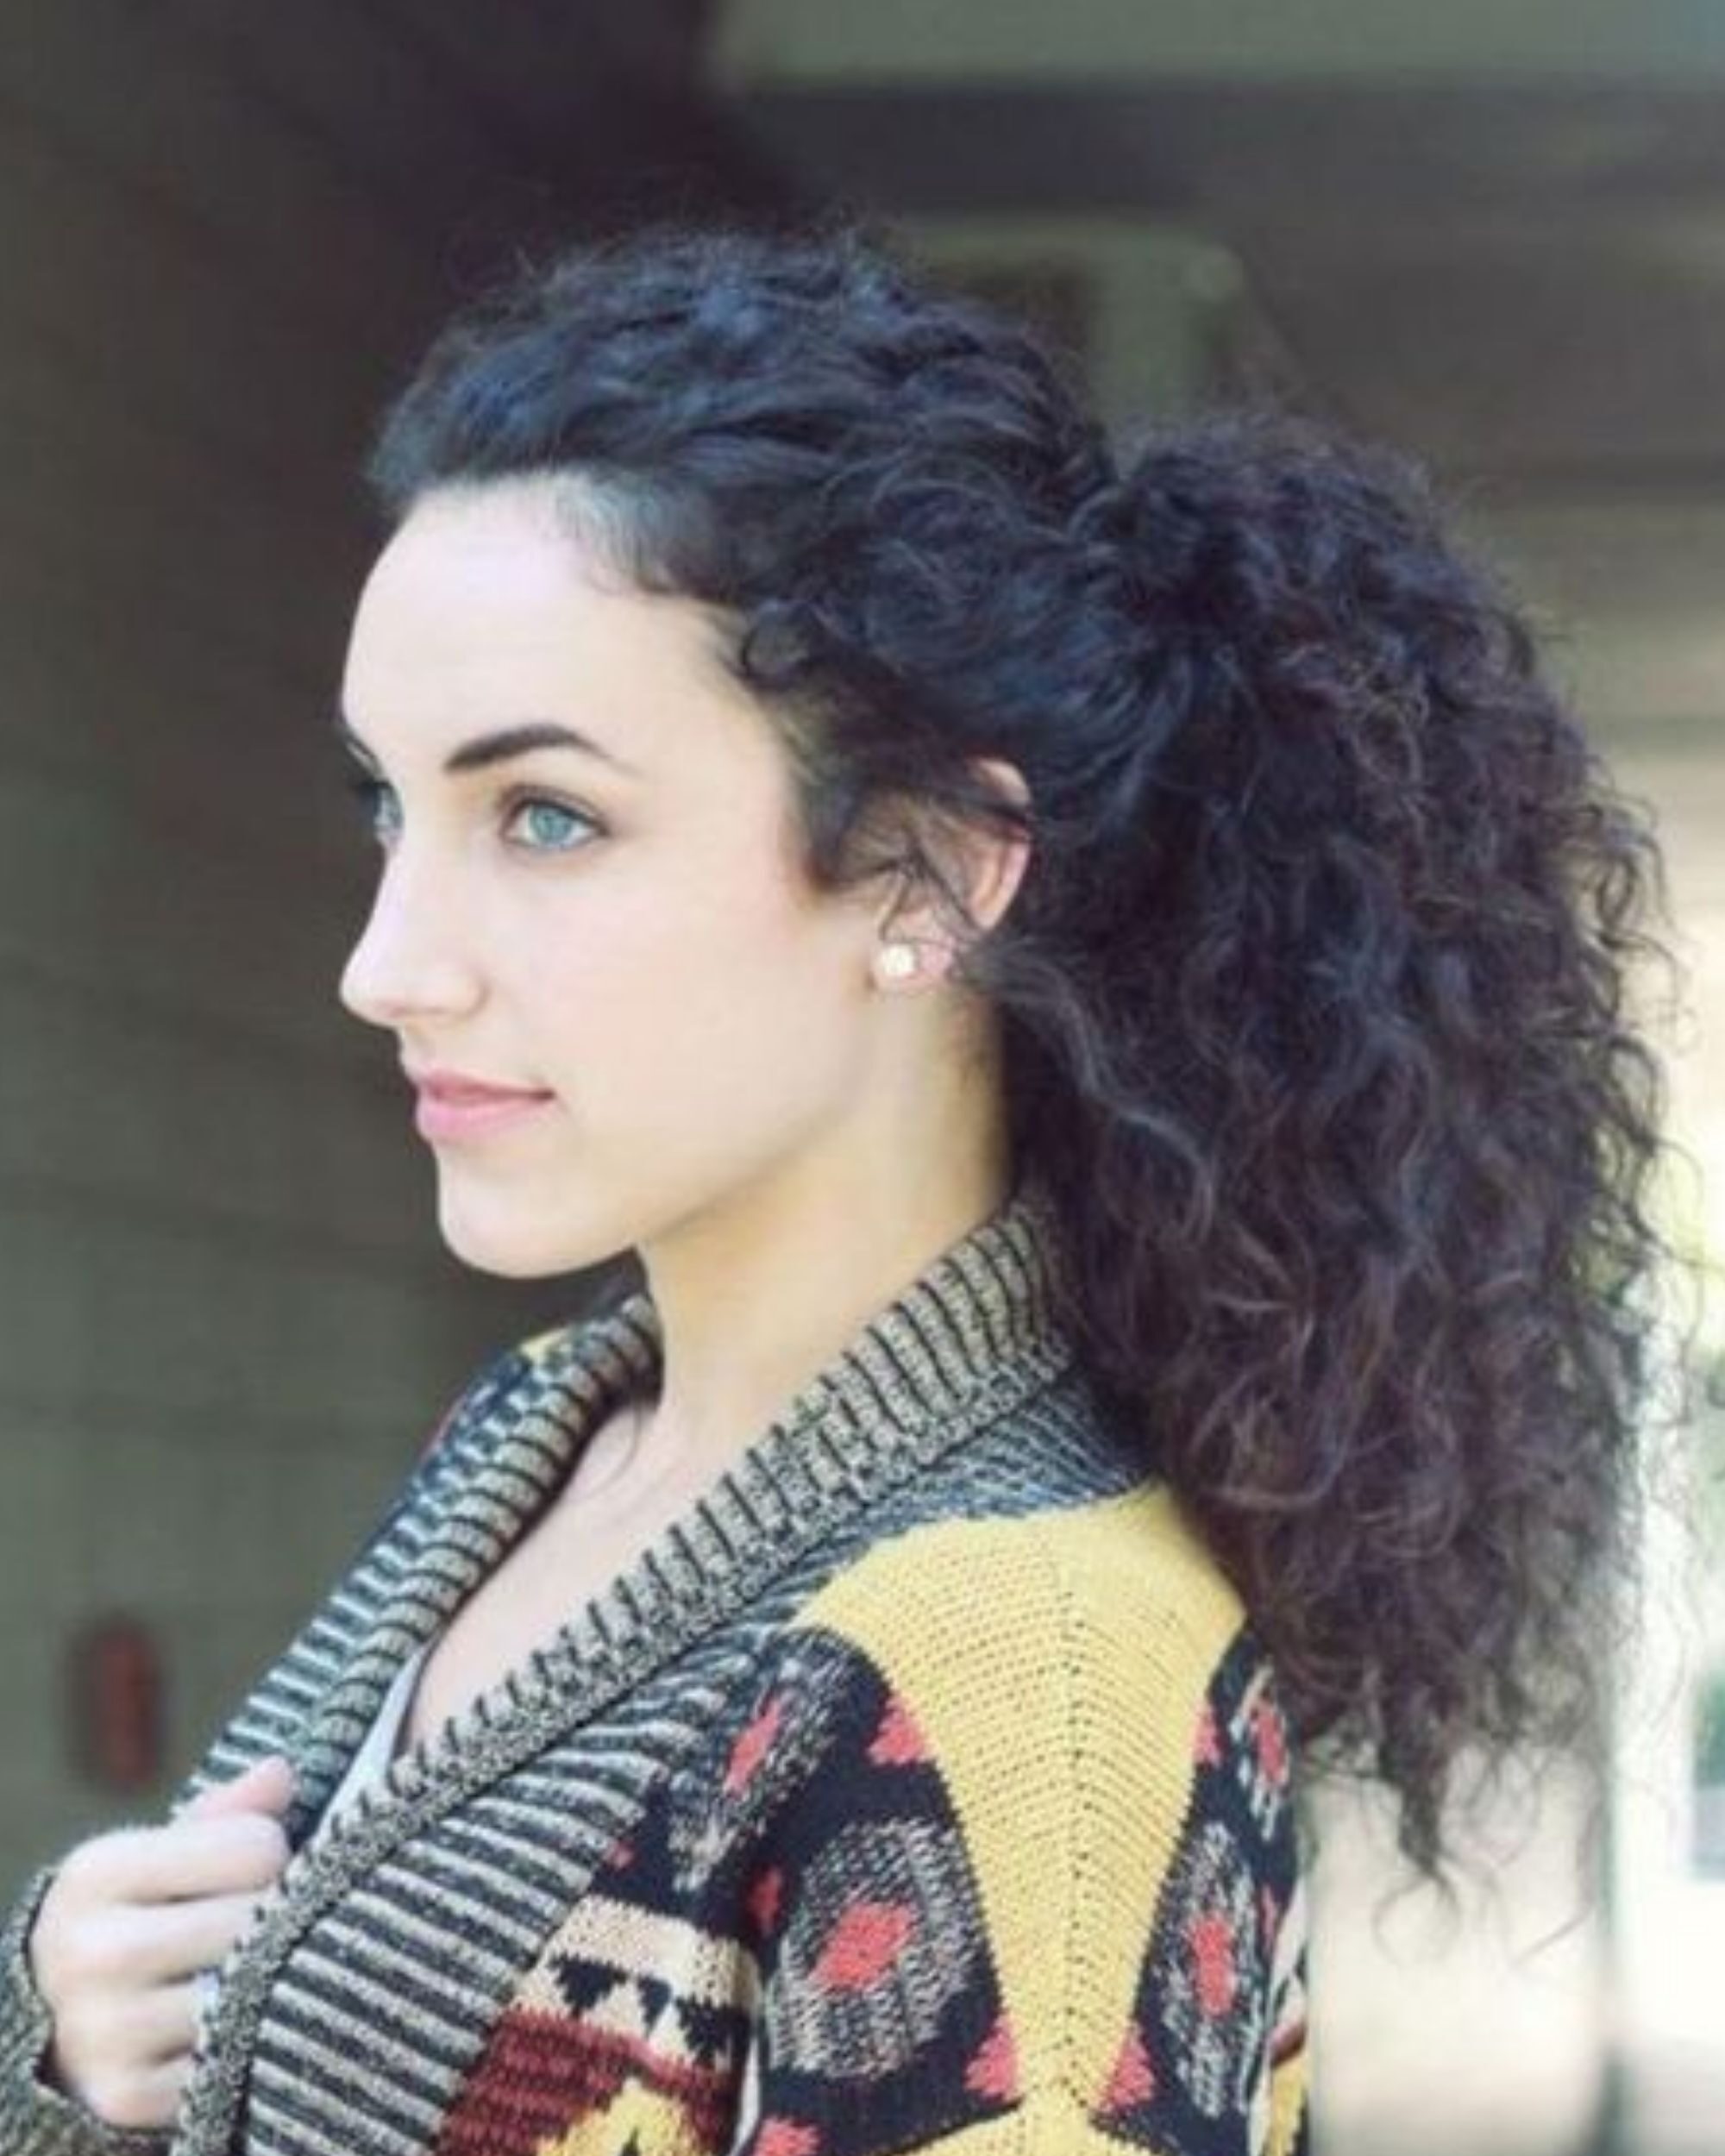 natural curly hairstyles